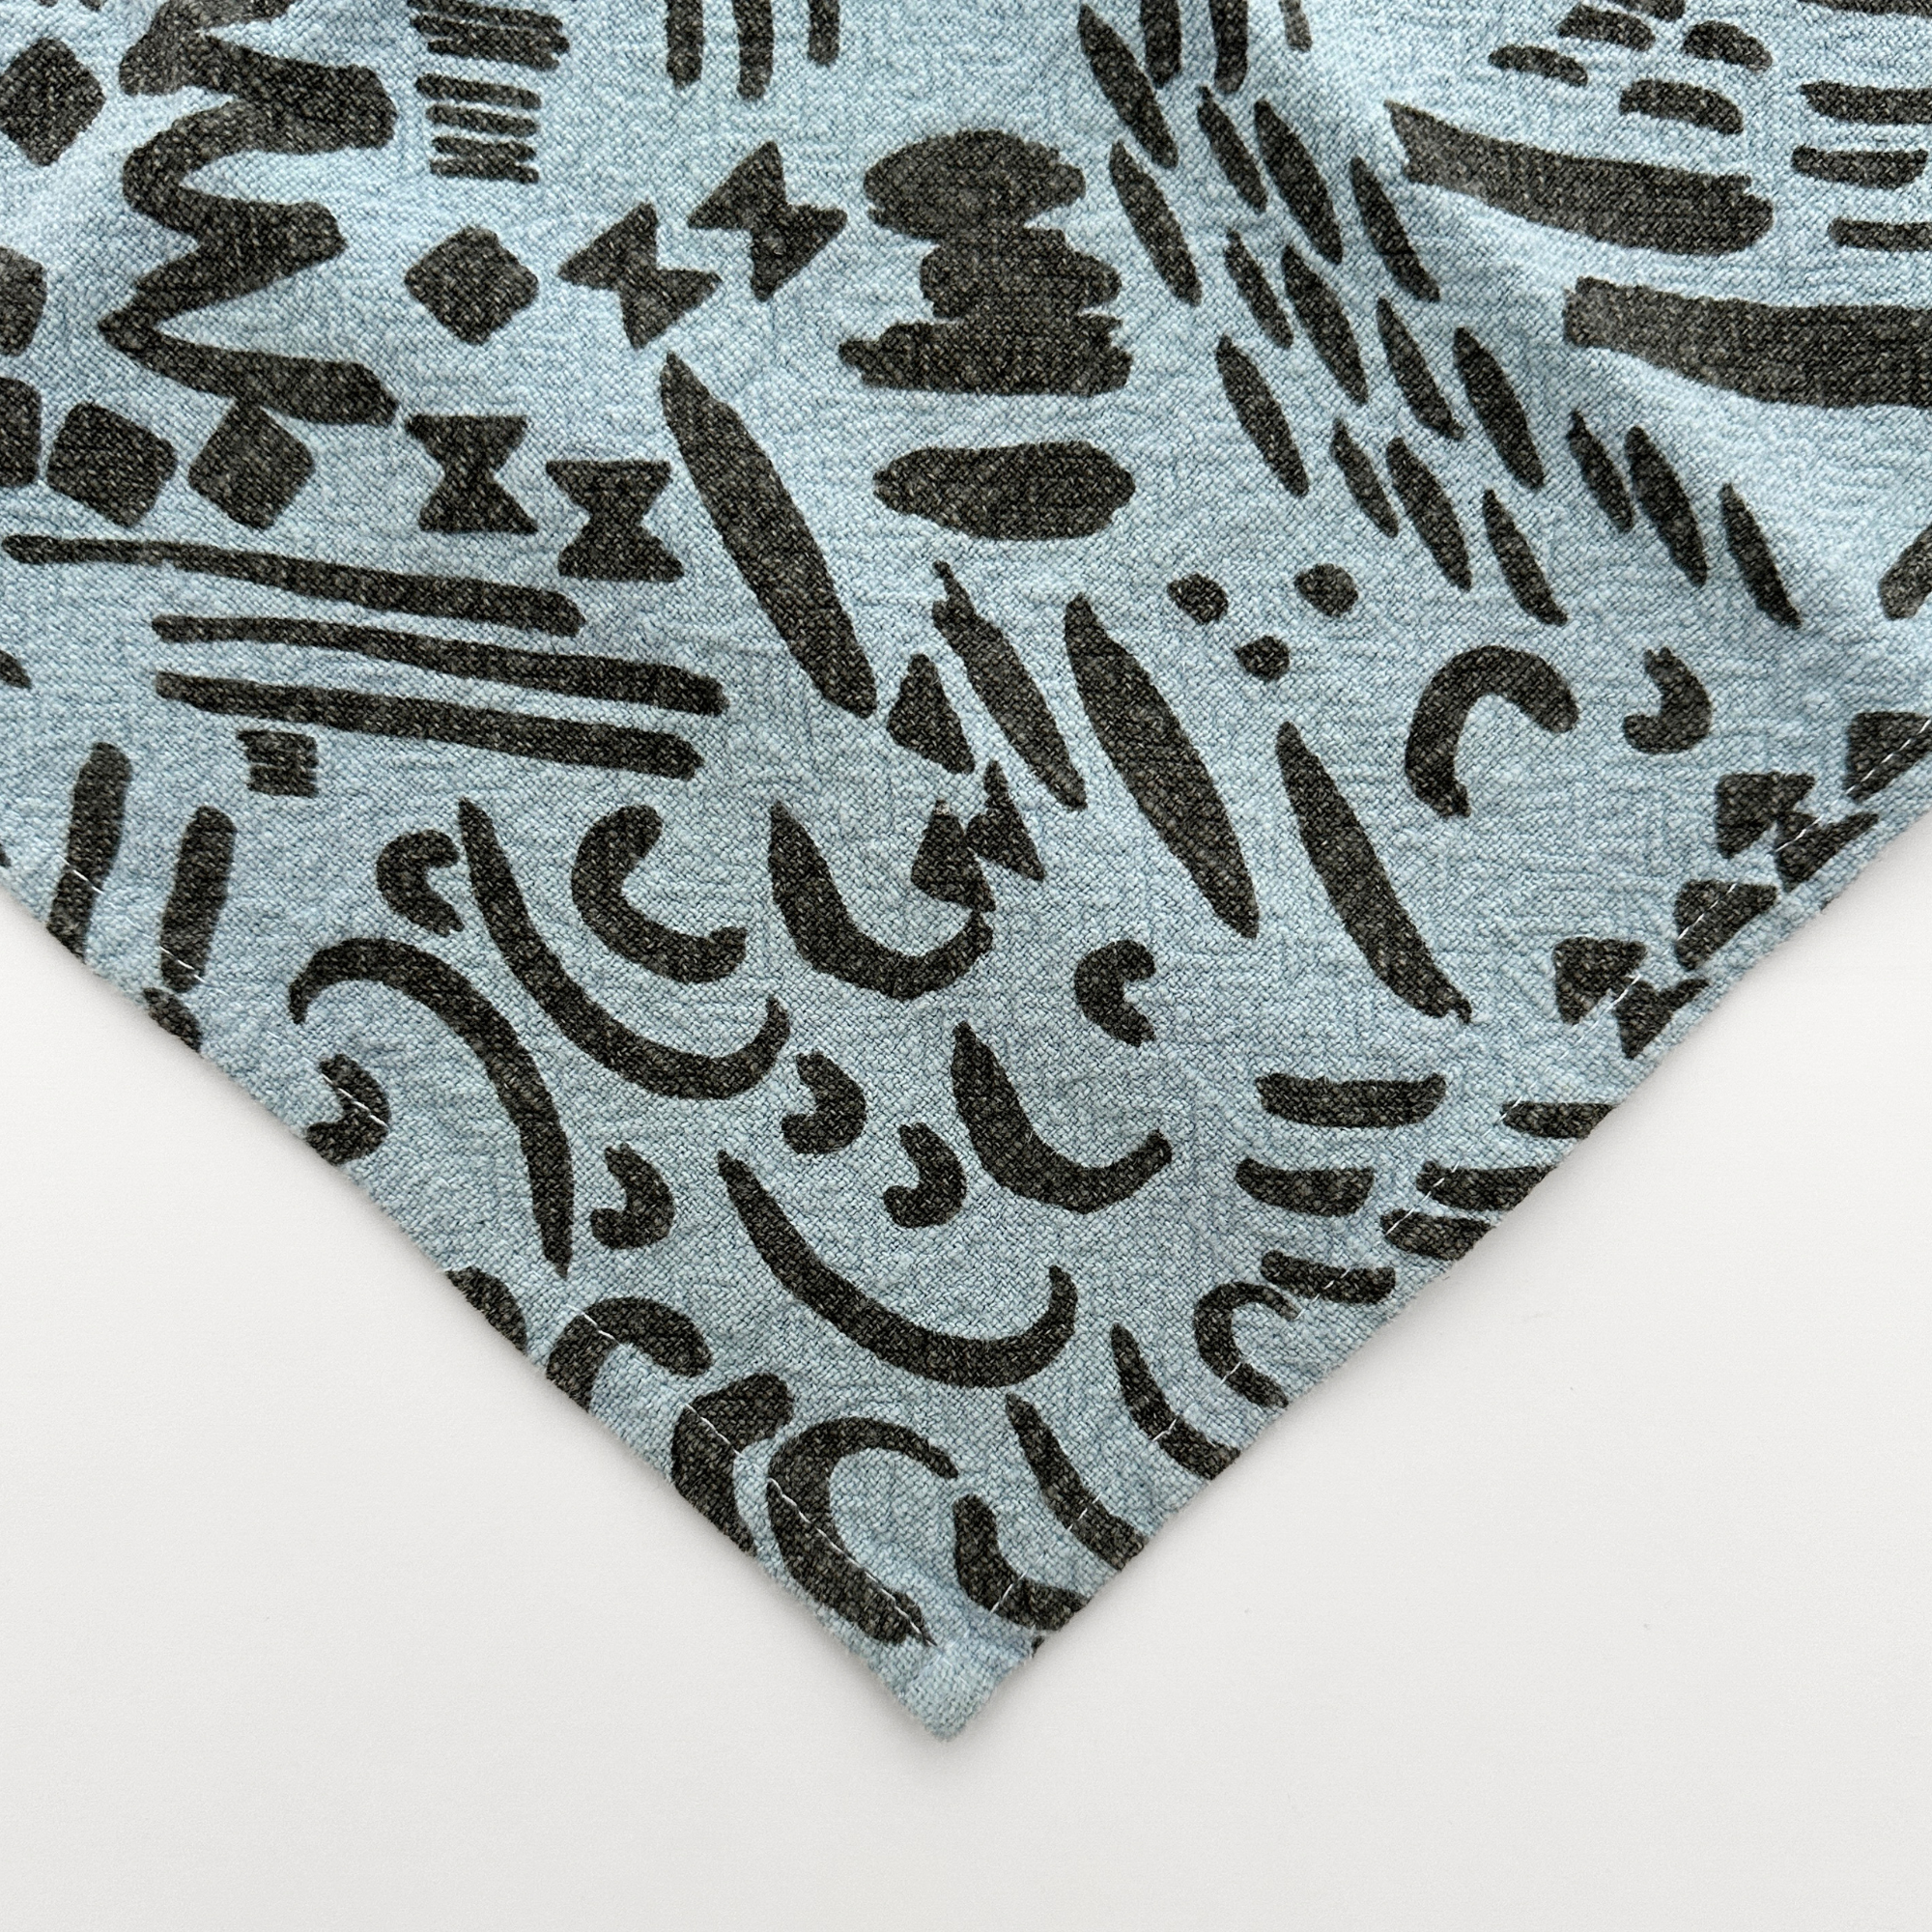 Everyday Napkins - Dashes & Moons - Charcoal - Steele Blue